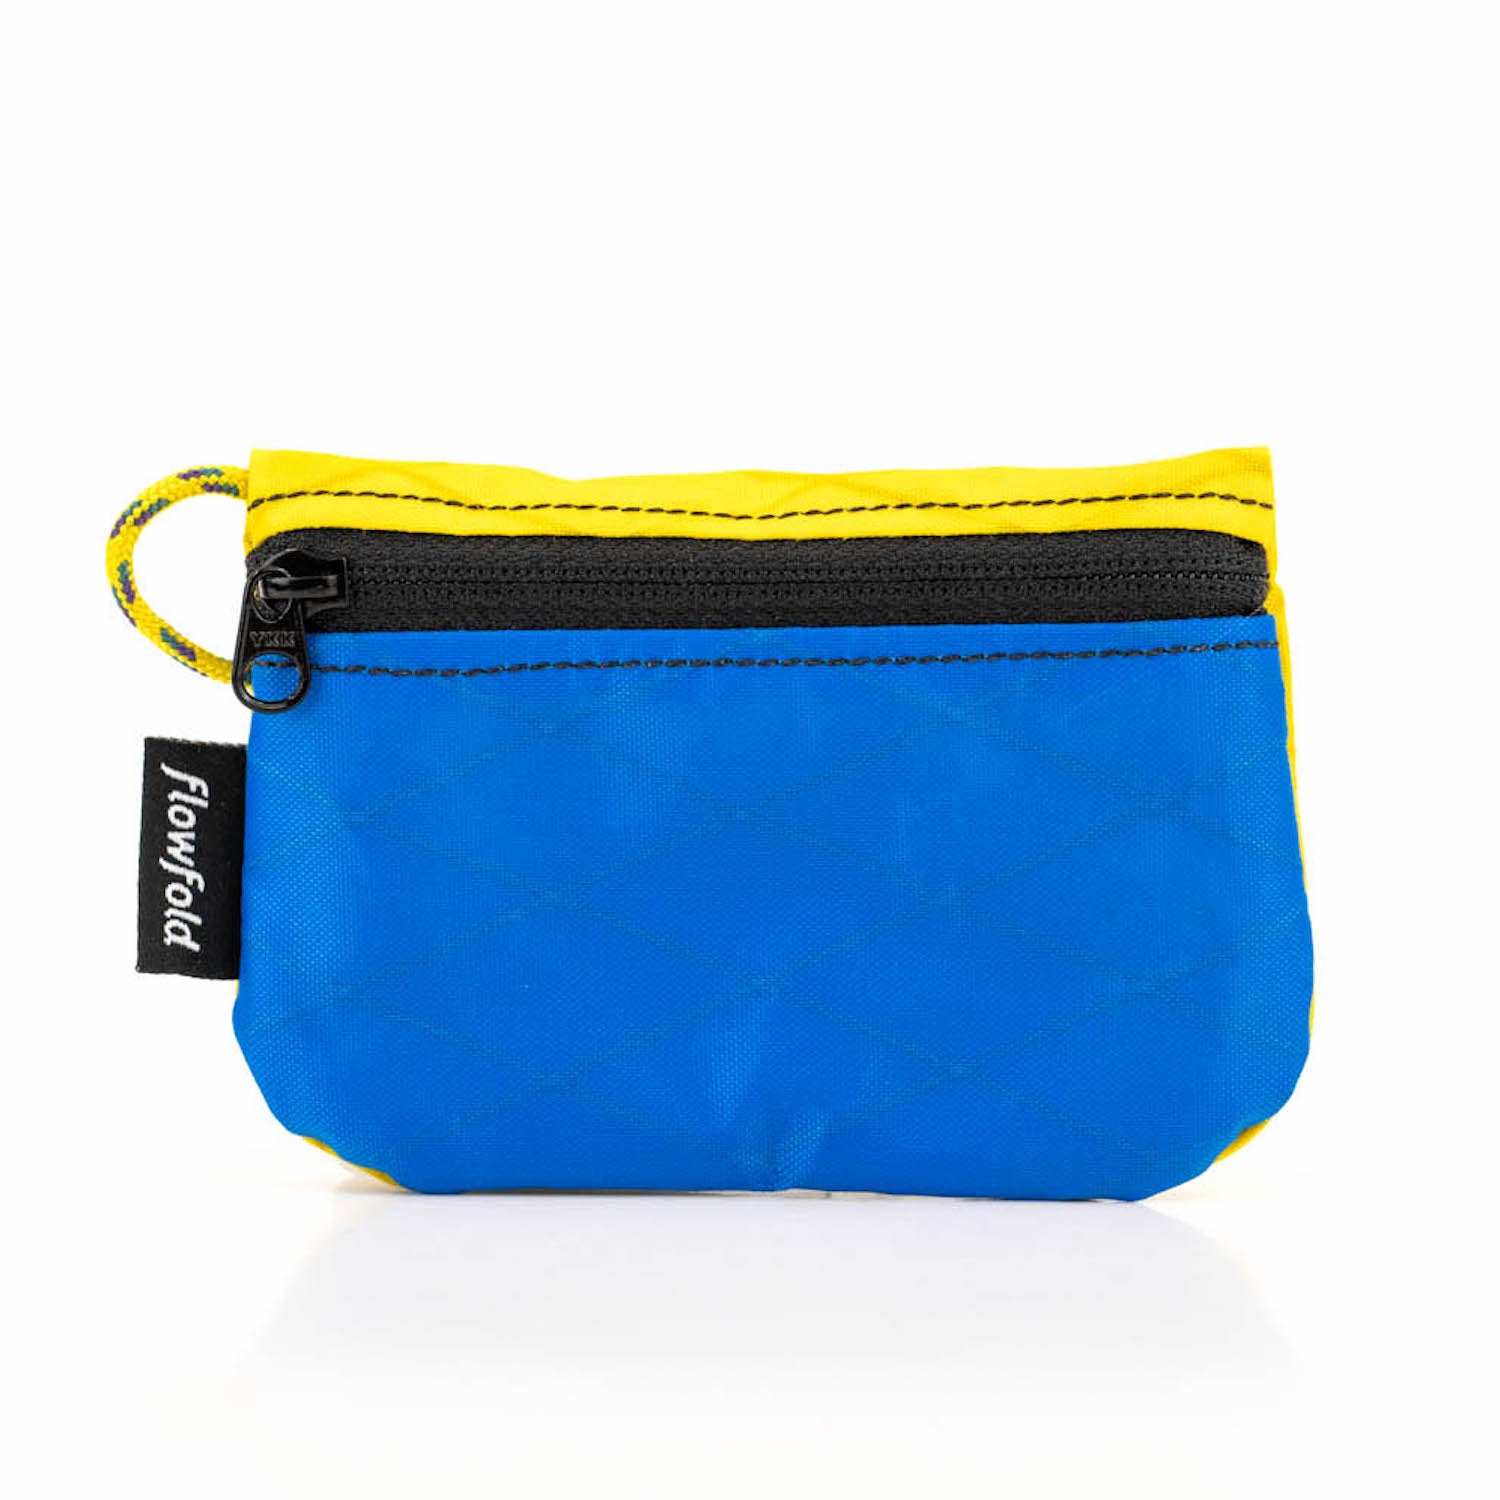 Yellow Essentialist Coin Pouch Wallet For Cash, Cards, and Coins Made in USA, Maine by Flowfold 